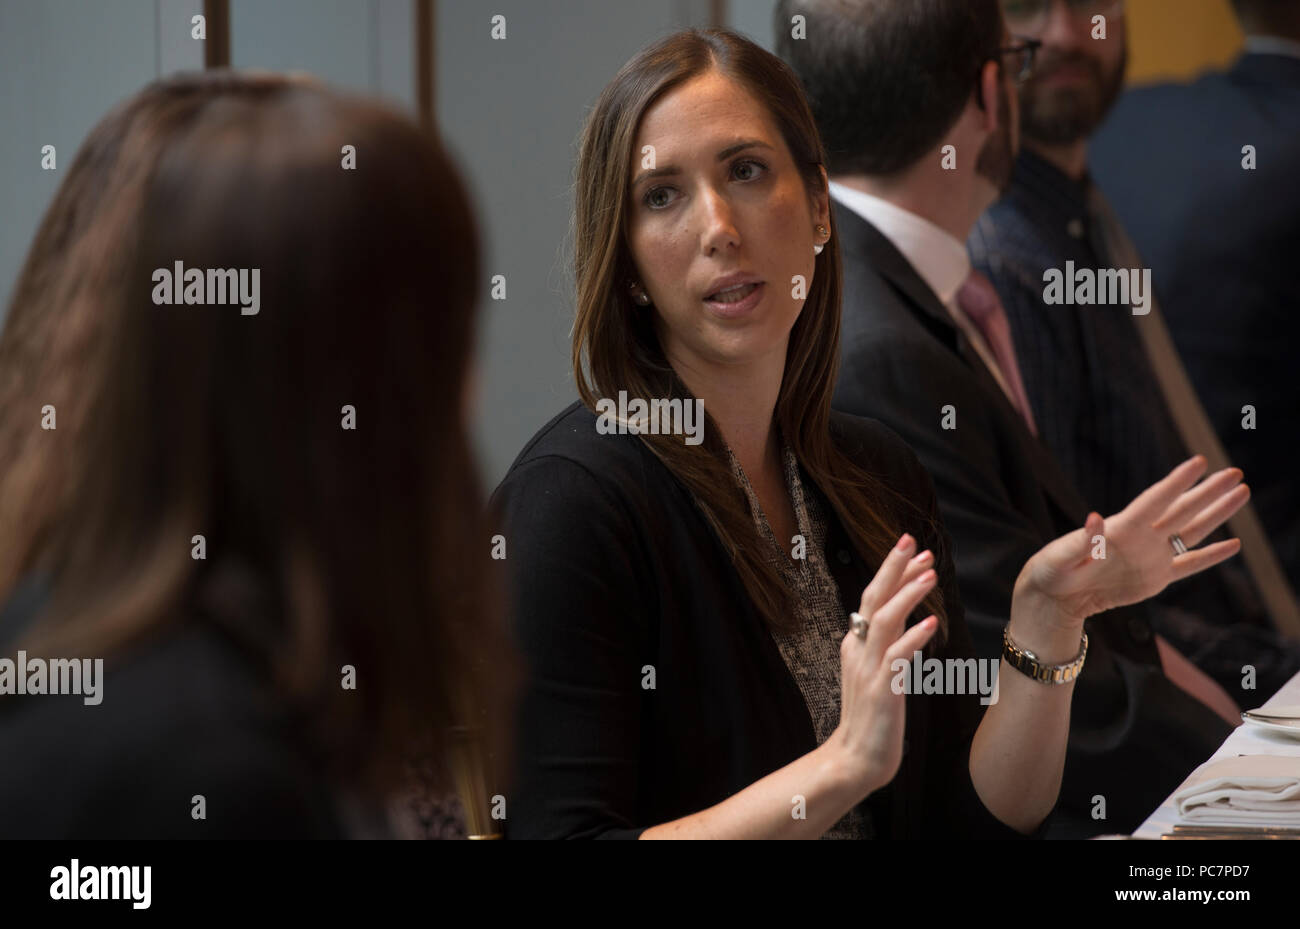 UNITED STATES: July 31, 2018: Sam Krall (back to camera) and Laura Golden Liff talk during the next Gen luncheon at the 2941 Restaurant in Arlington V Stock Photo